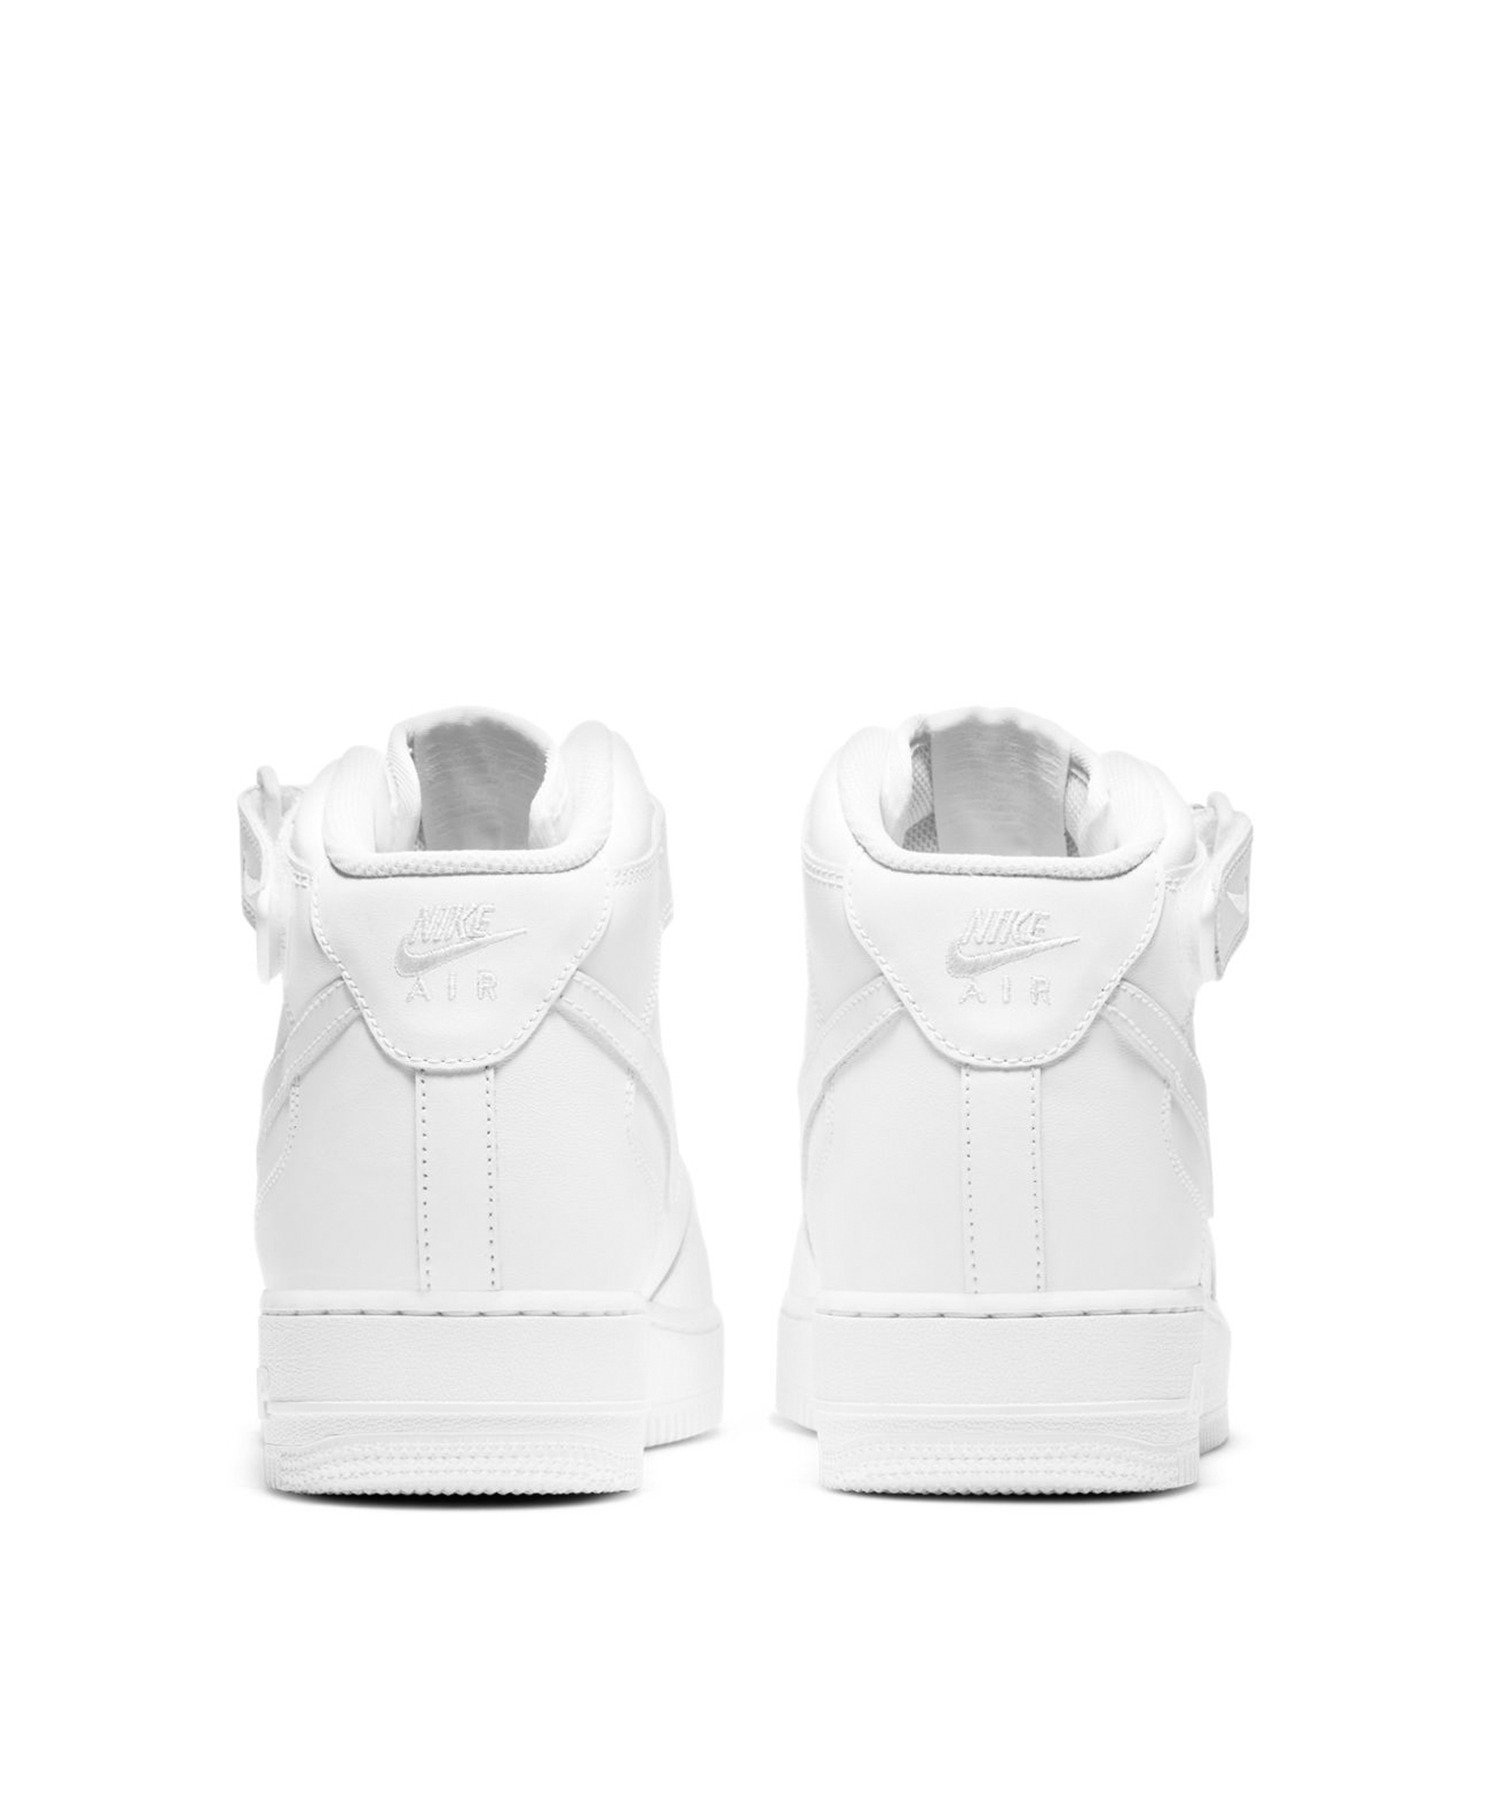 NIKE AIR FORCE 1 MID 07 詳細画像 ホワイト 6